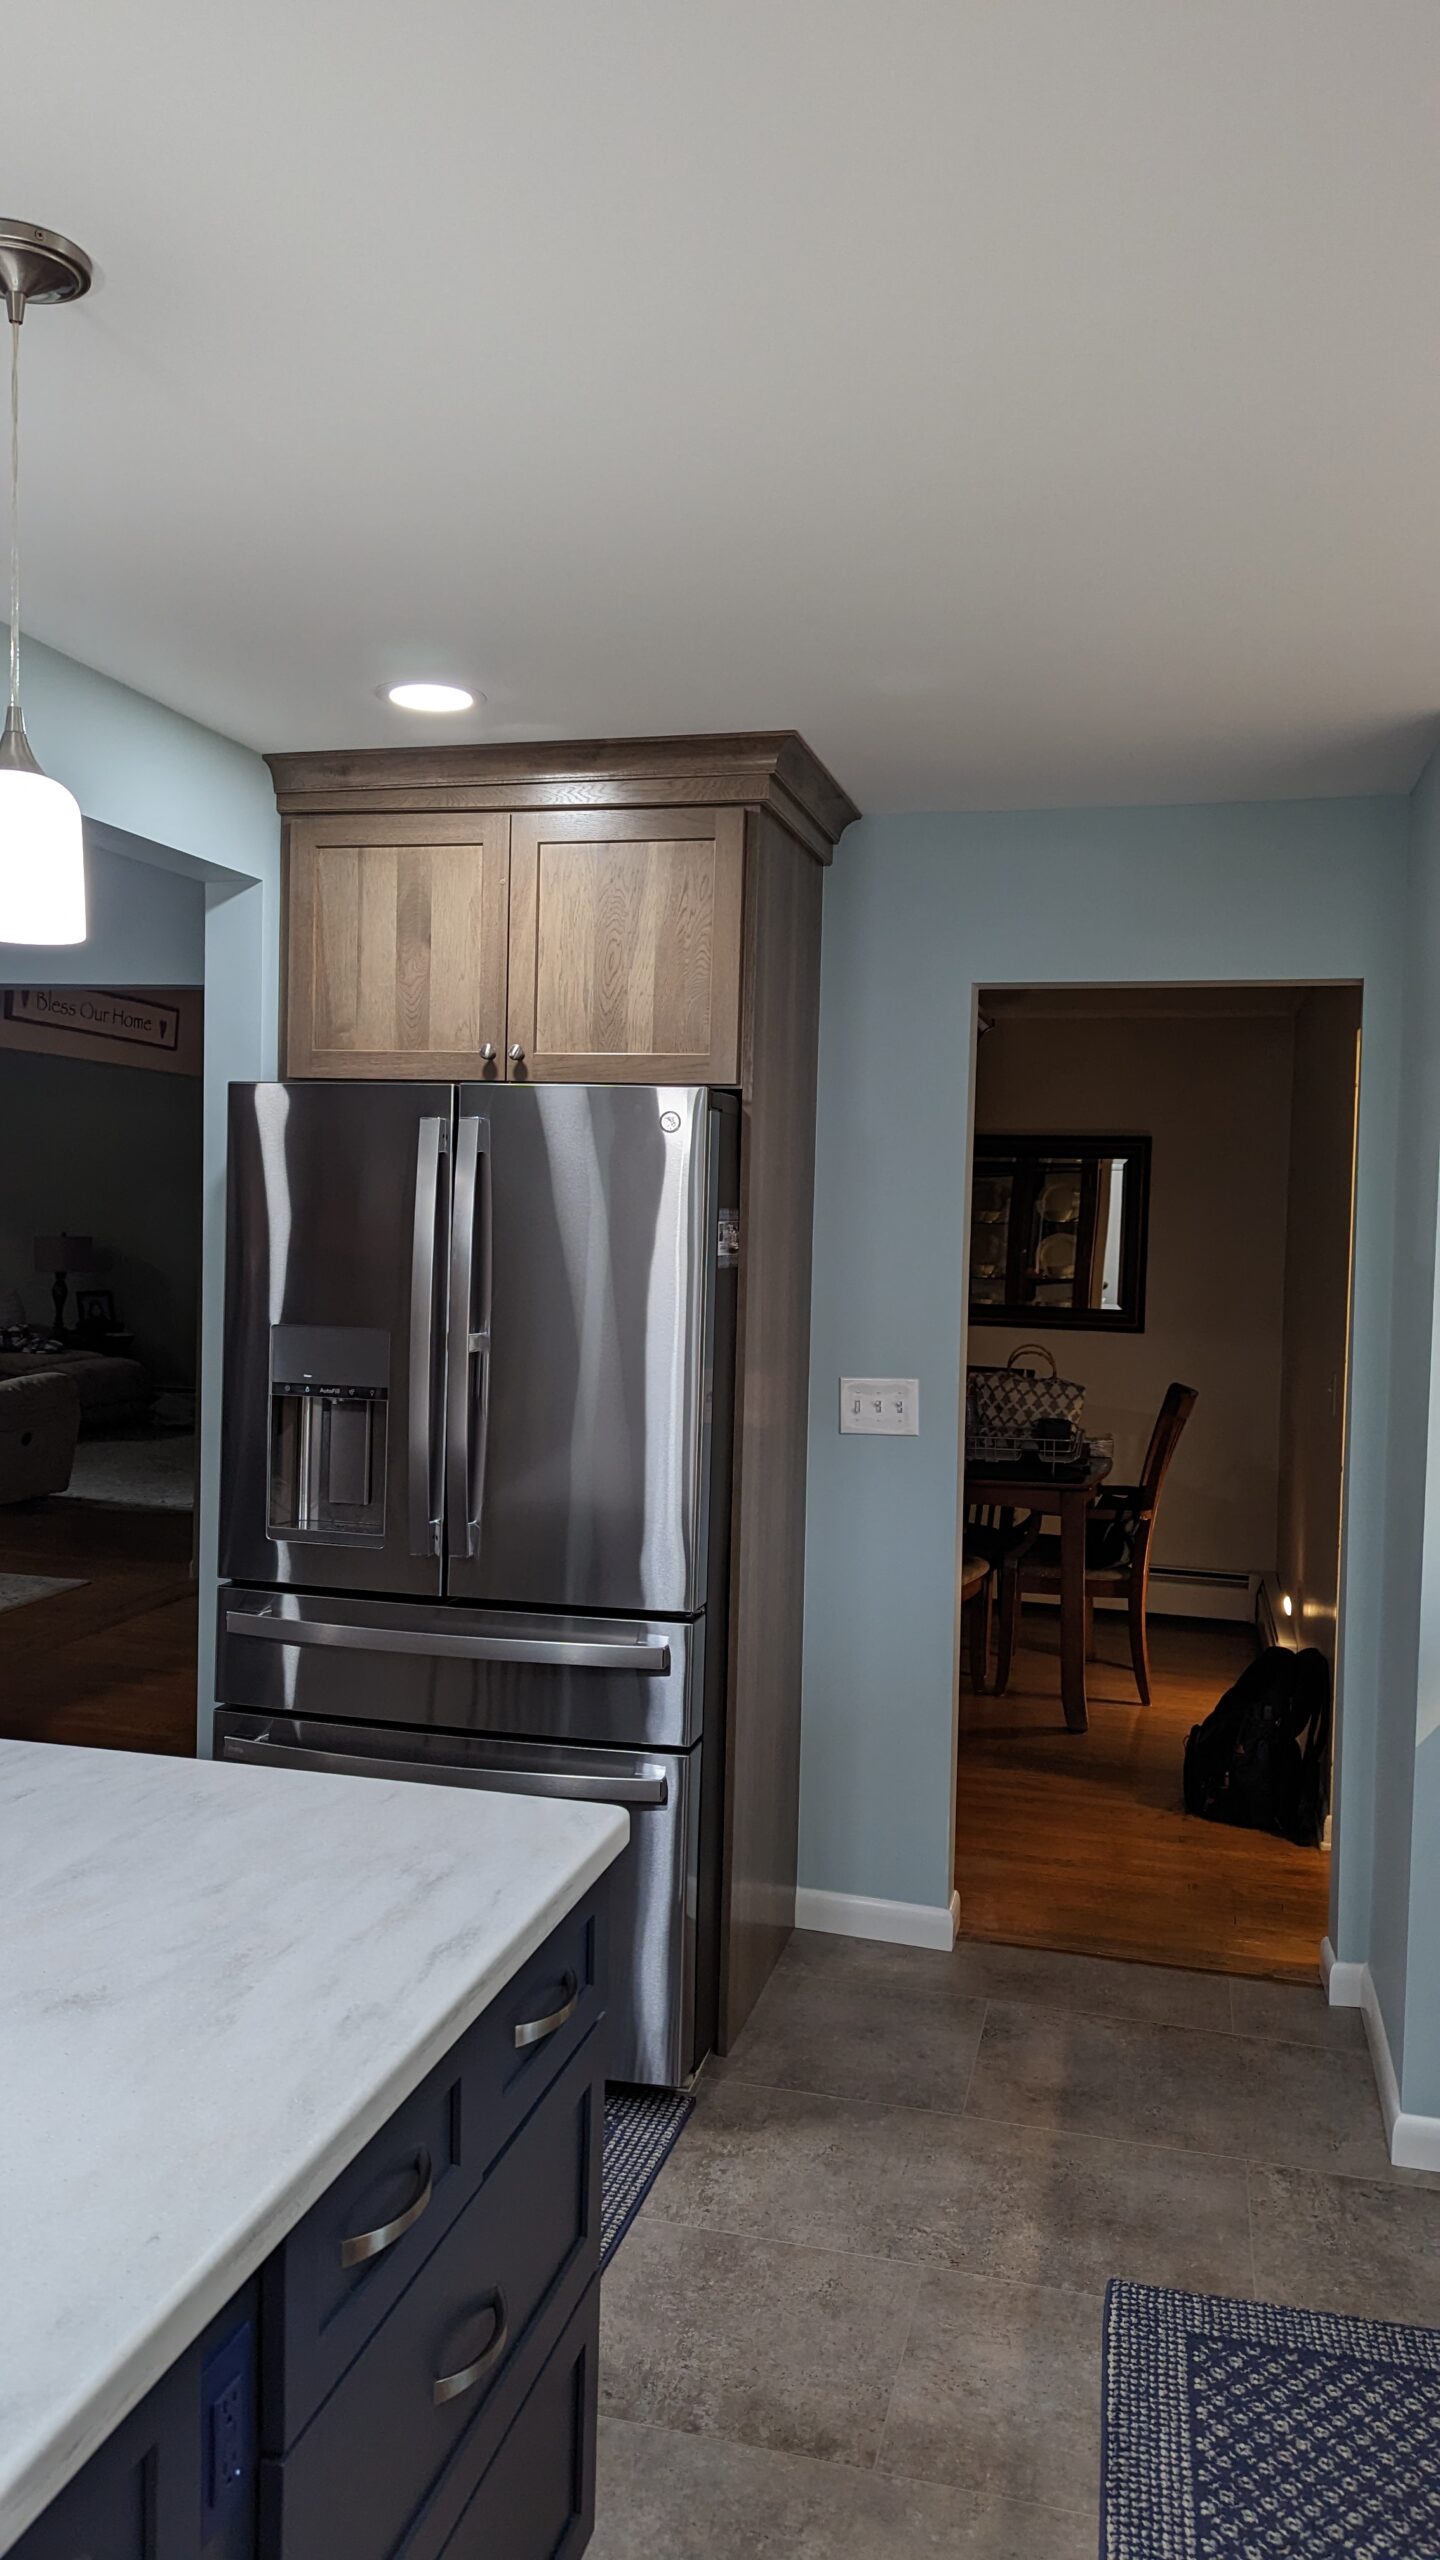 View of the new kitchen showing the refrigerator area